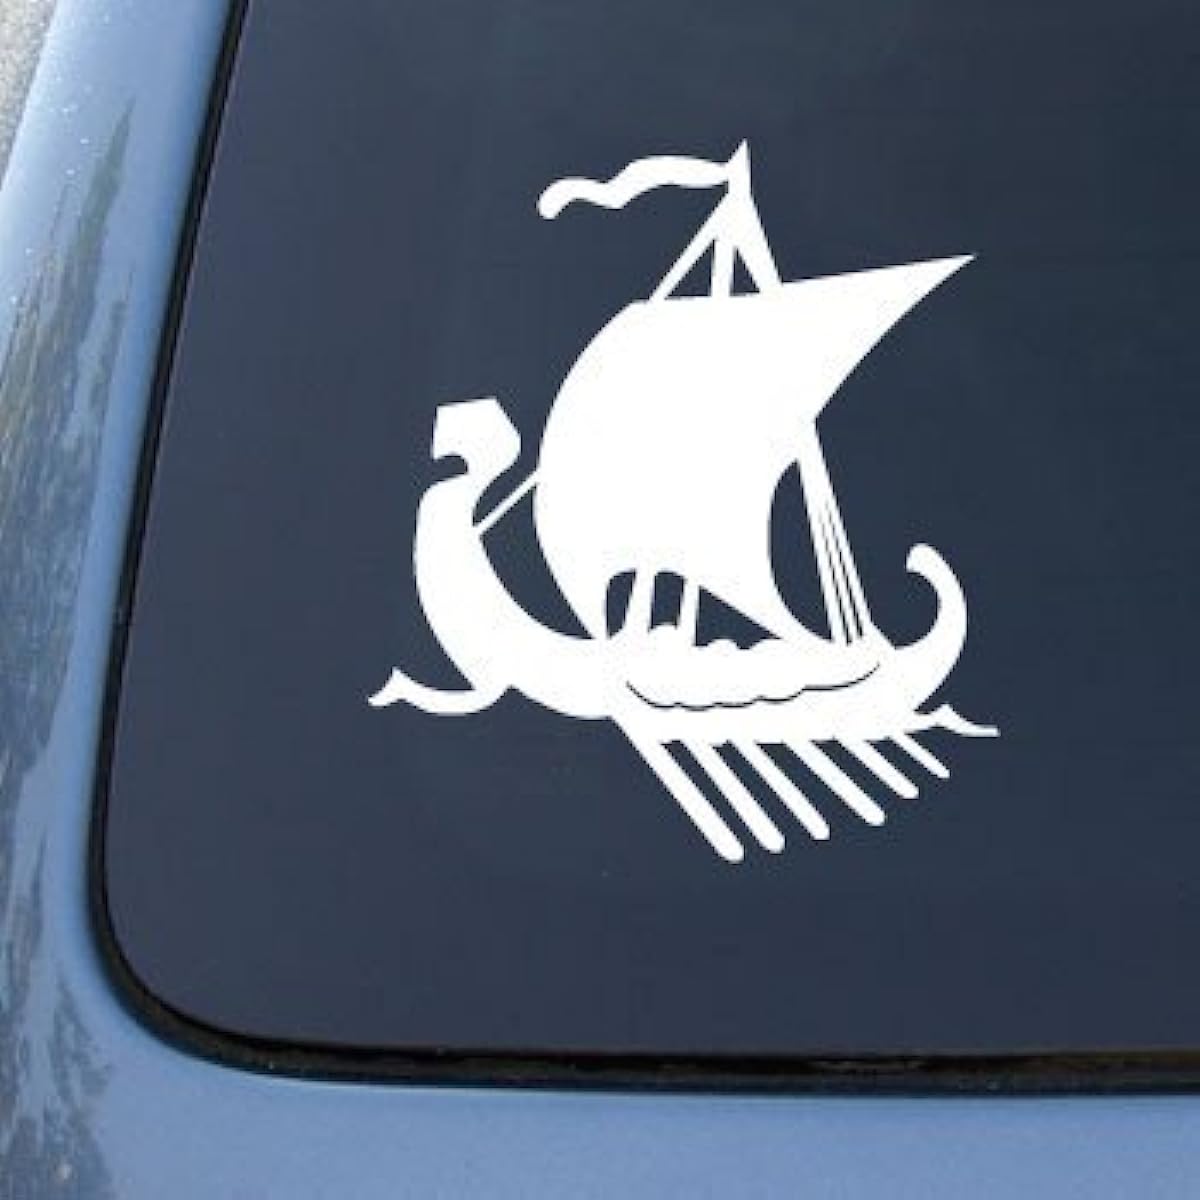 Viking Ship Boat Funny Car Sticker For Laptop Vehicle Paint Window Wall Cup  Fishing Boat Skateboard Decals Auto Accessories